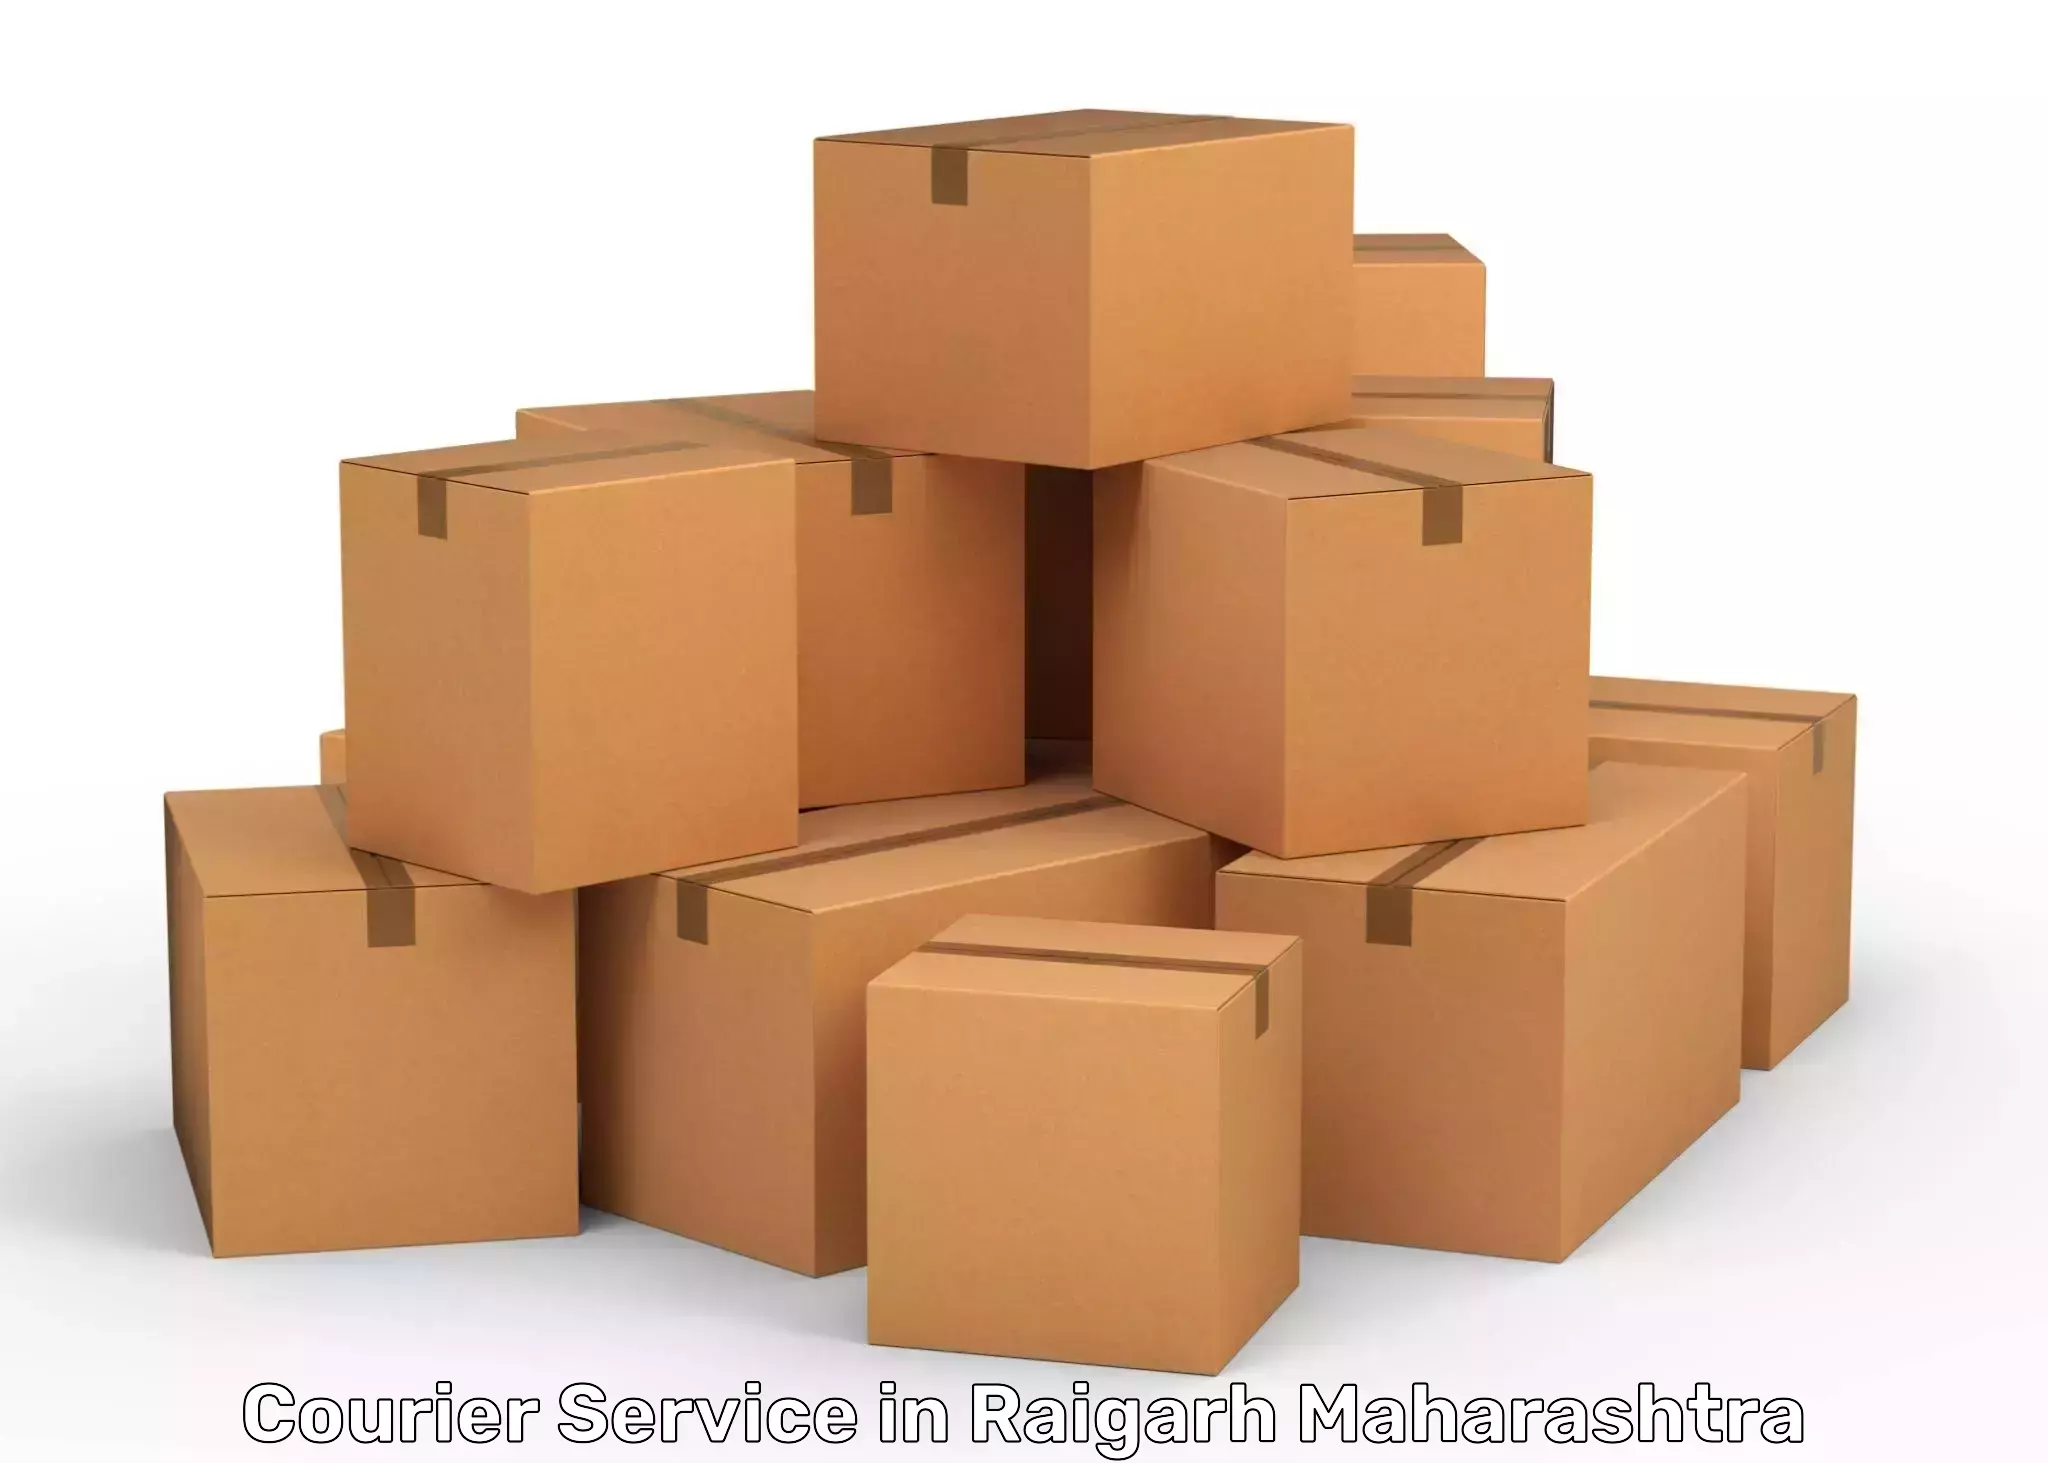 Parcel handling and care in Raigarh Maharashtra